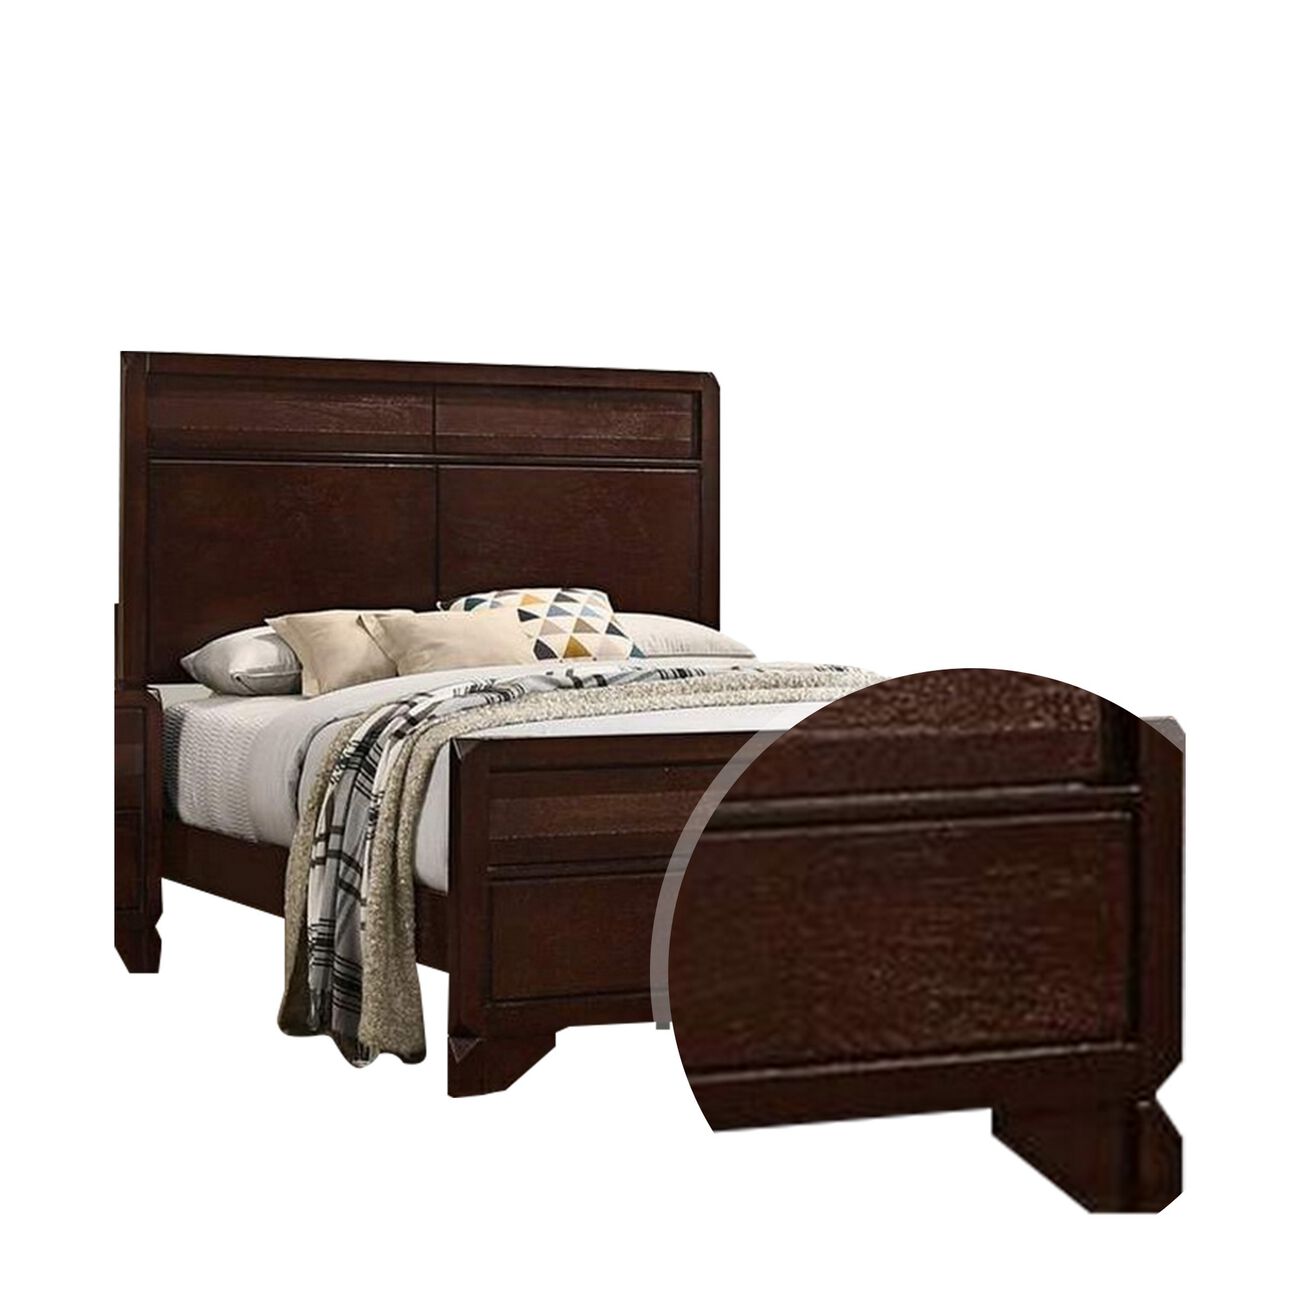 Panel Design Wooden King Headboard and Footboard with Molded Detail, Brown